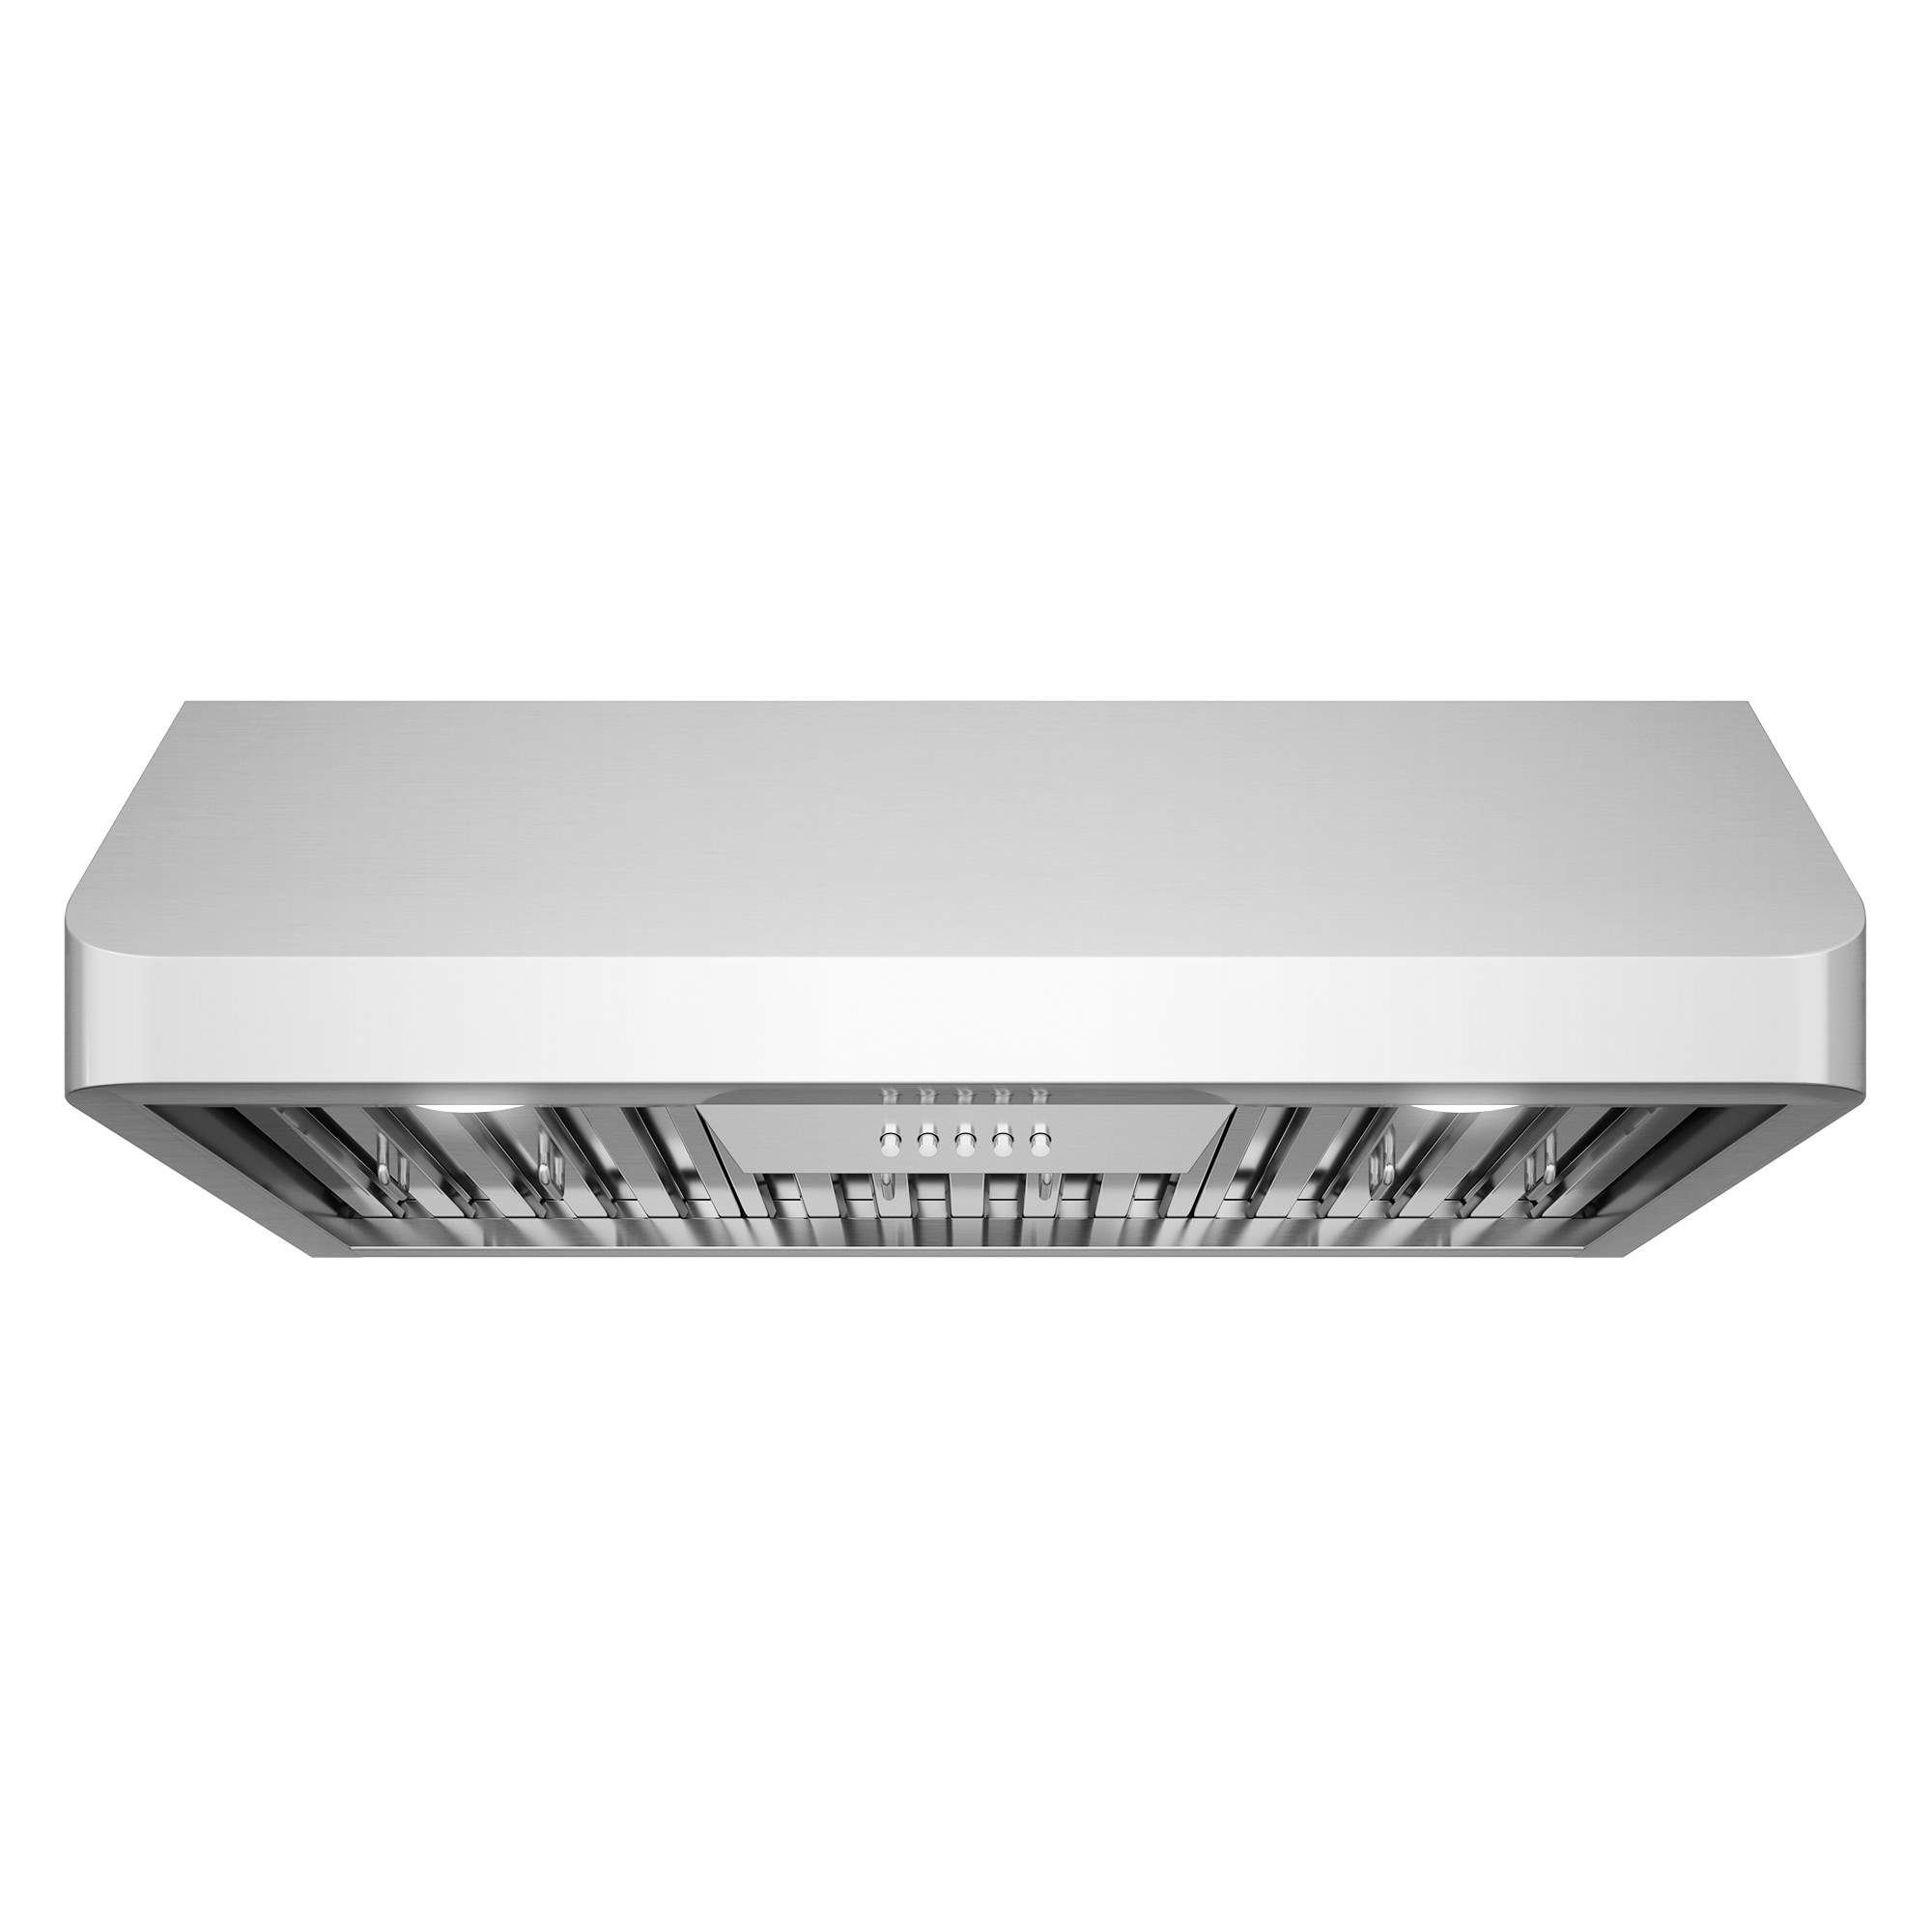 Qb75 30-in 500-CFM Ducted Stainless Steel Under Cabinet Range Hoods Undercabinet Mount | - Cosmo COS-QB75